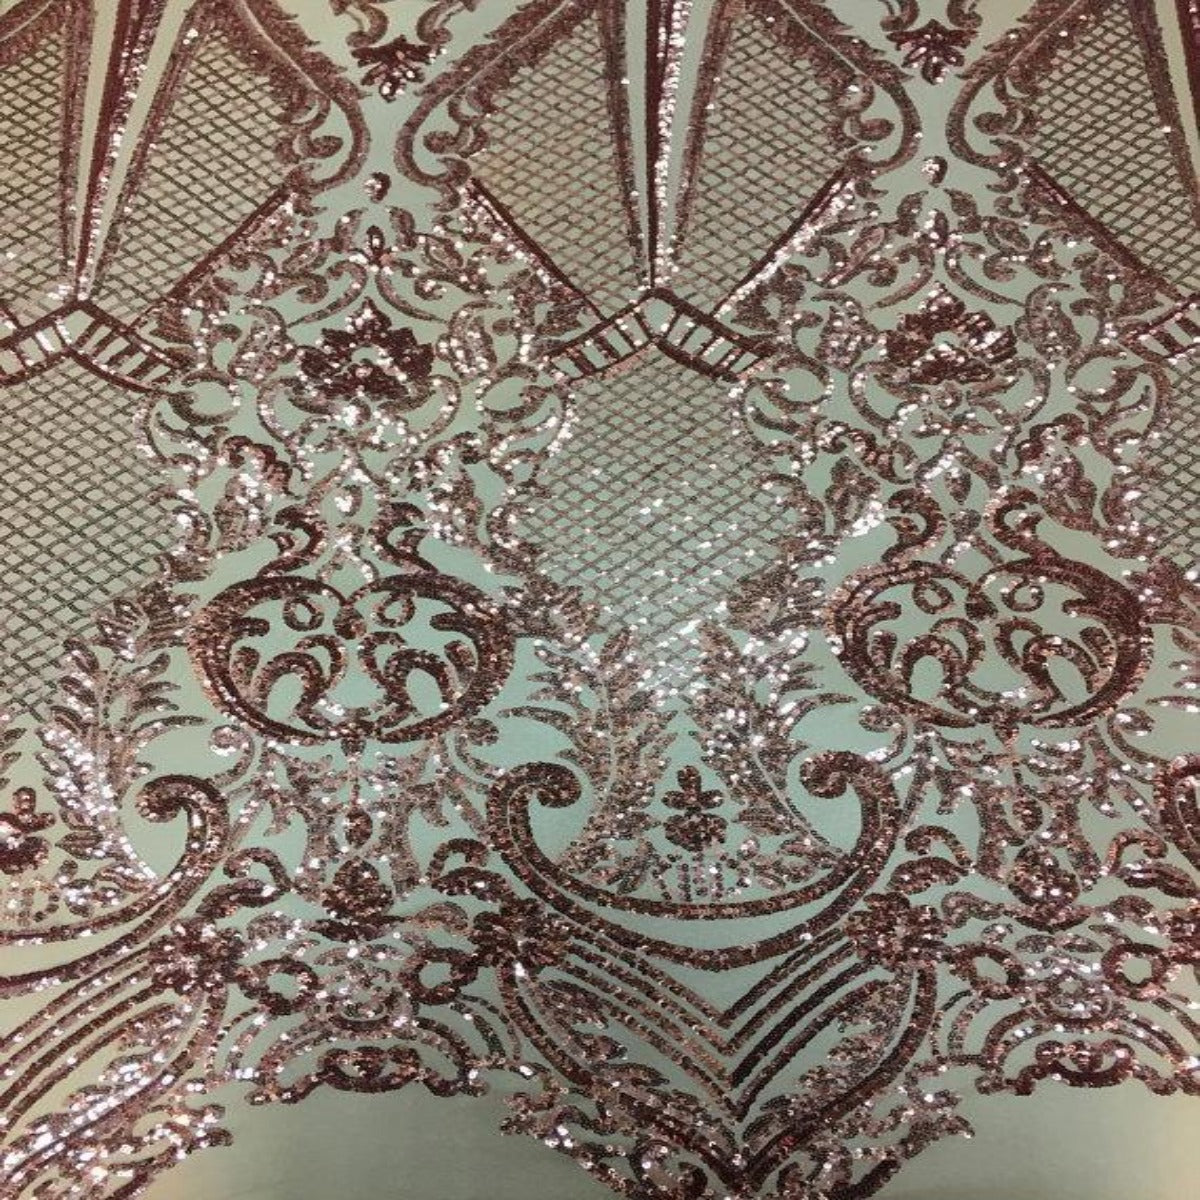 Dusty Rose Chantal Deluxe Sequins Lace Fabric - Fashion Fabrics LLC